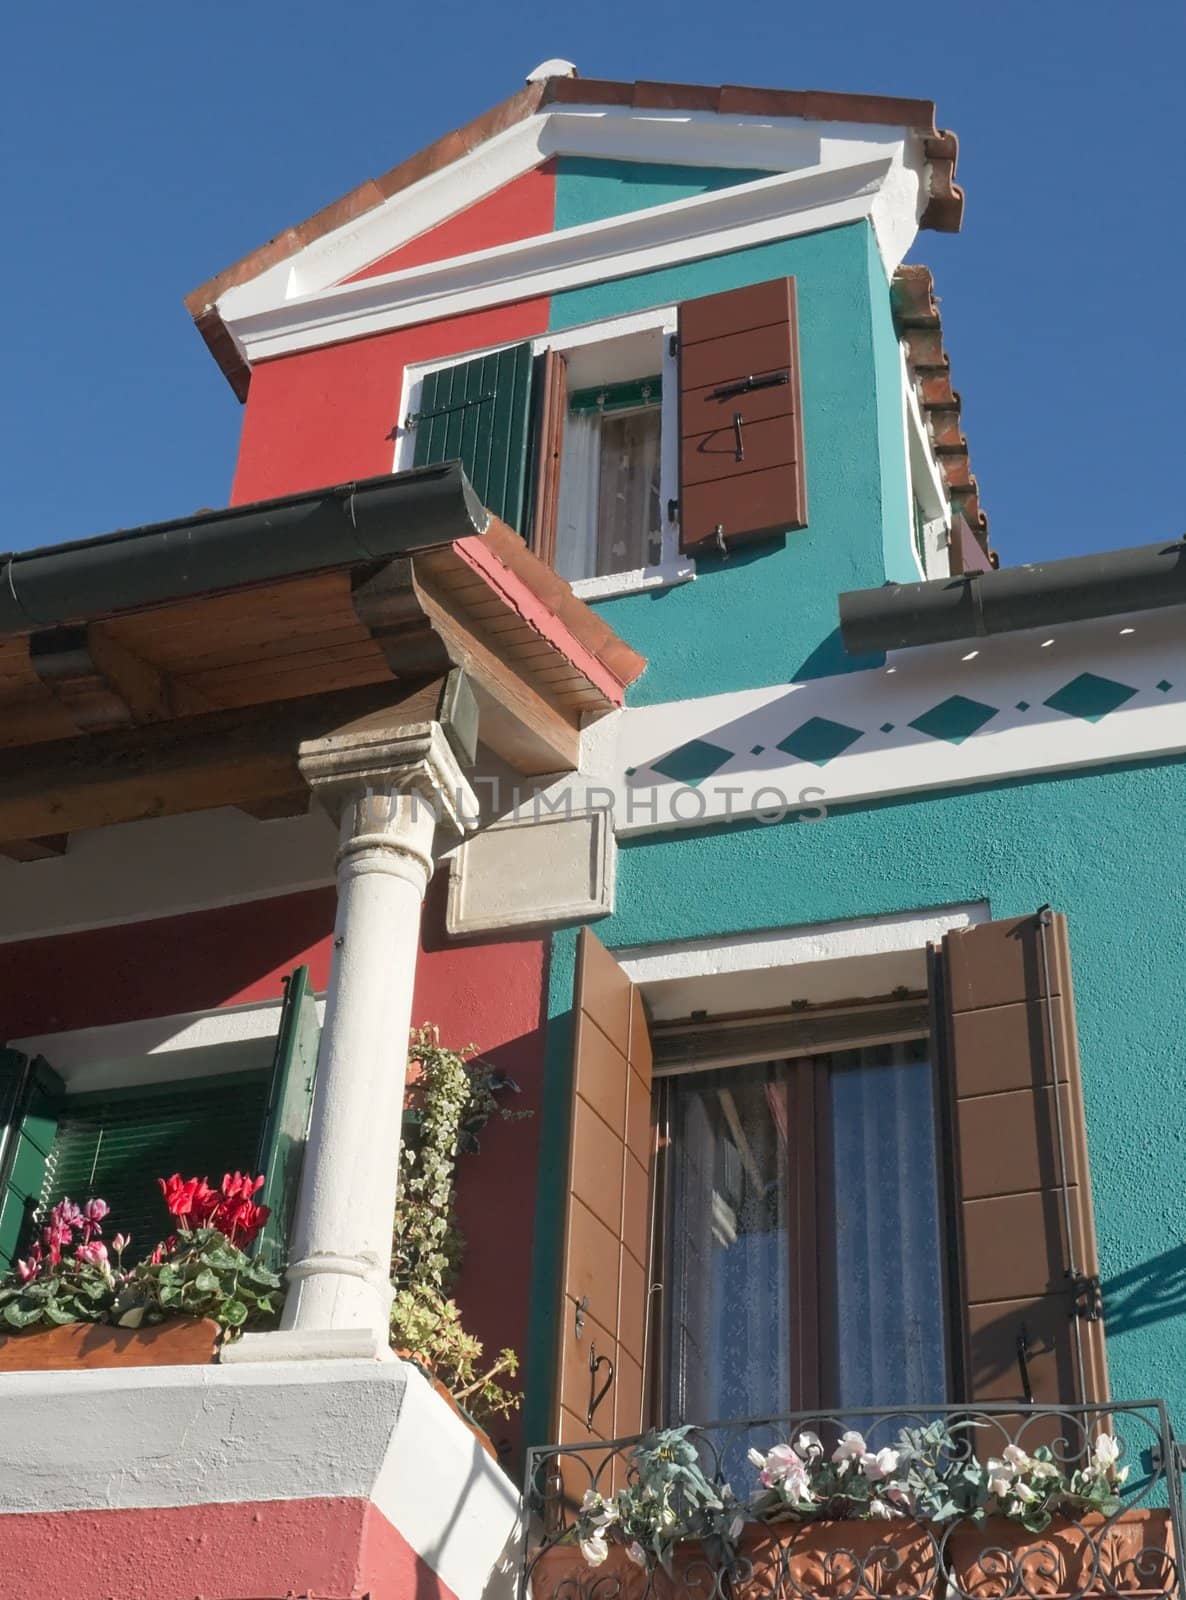 Brightly-colored house on the island of Burano, near Venice